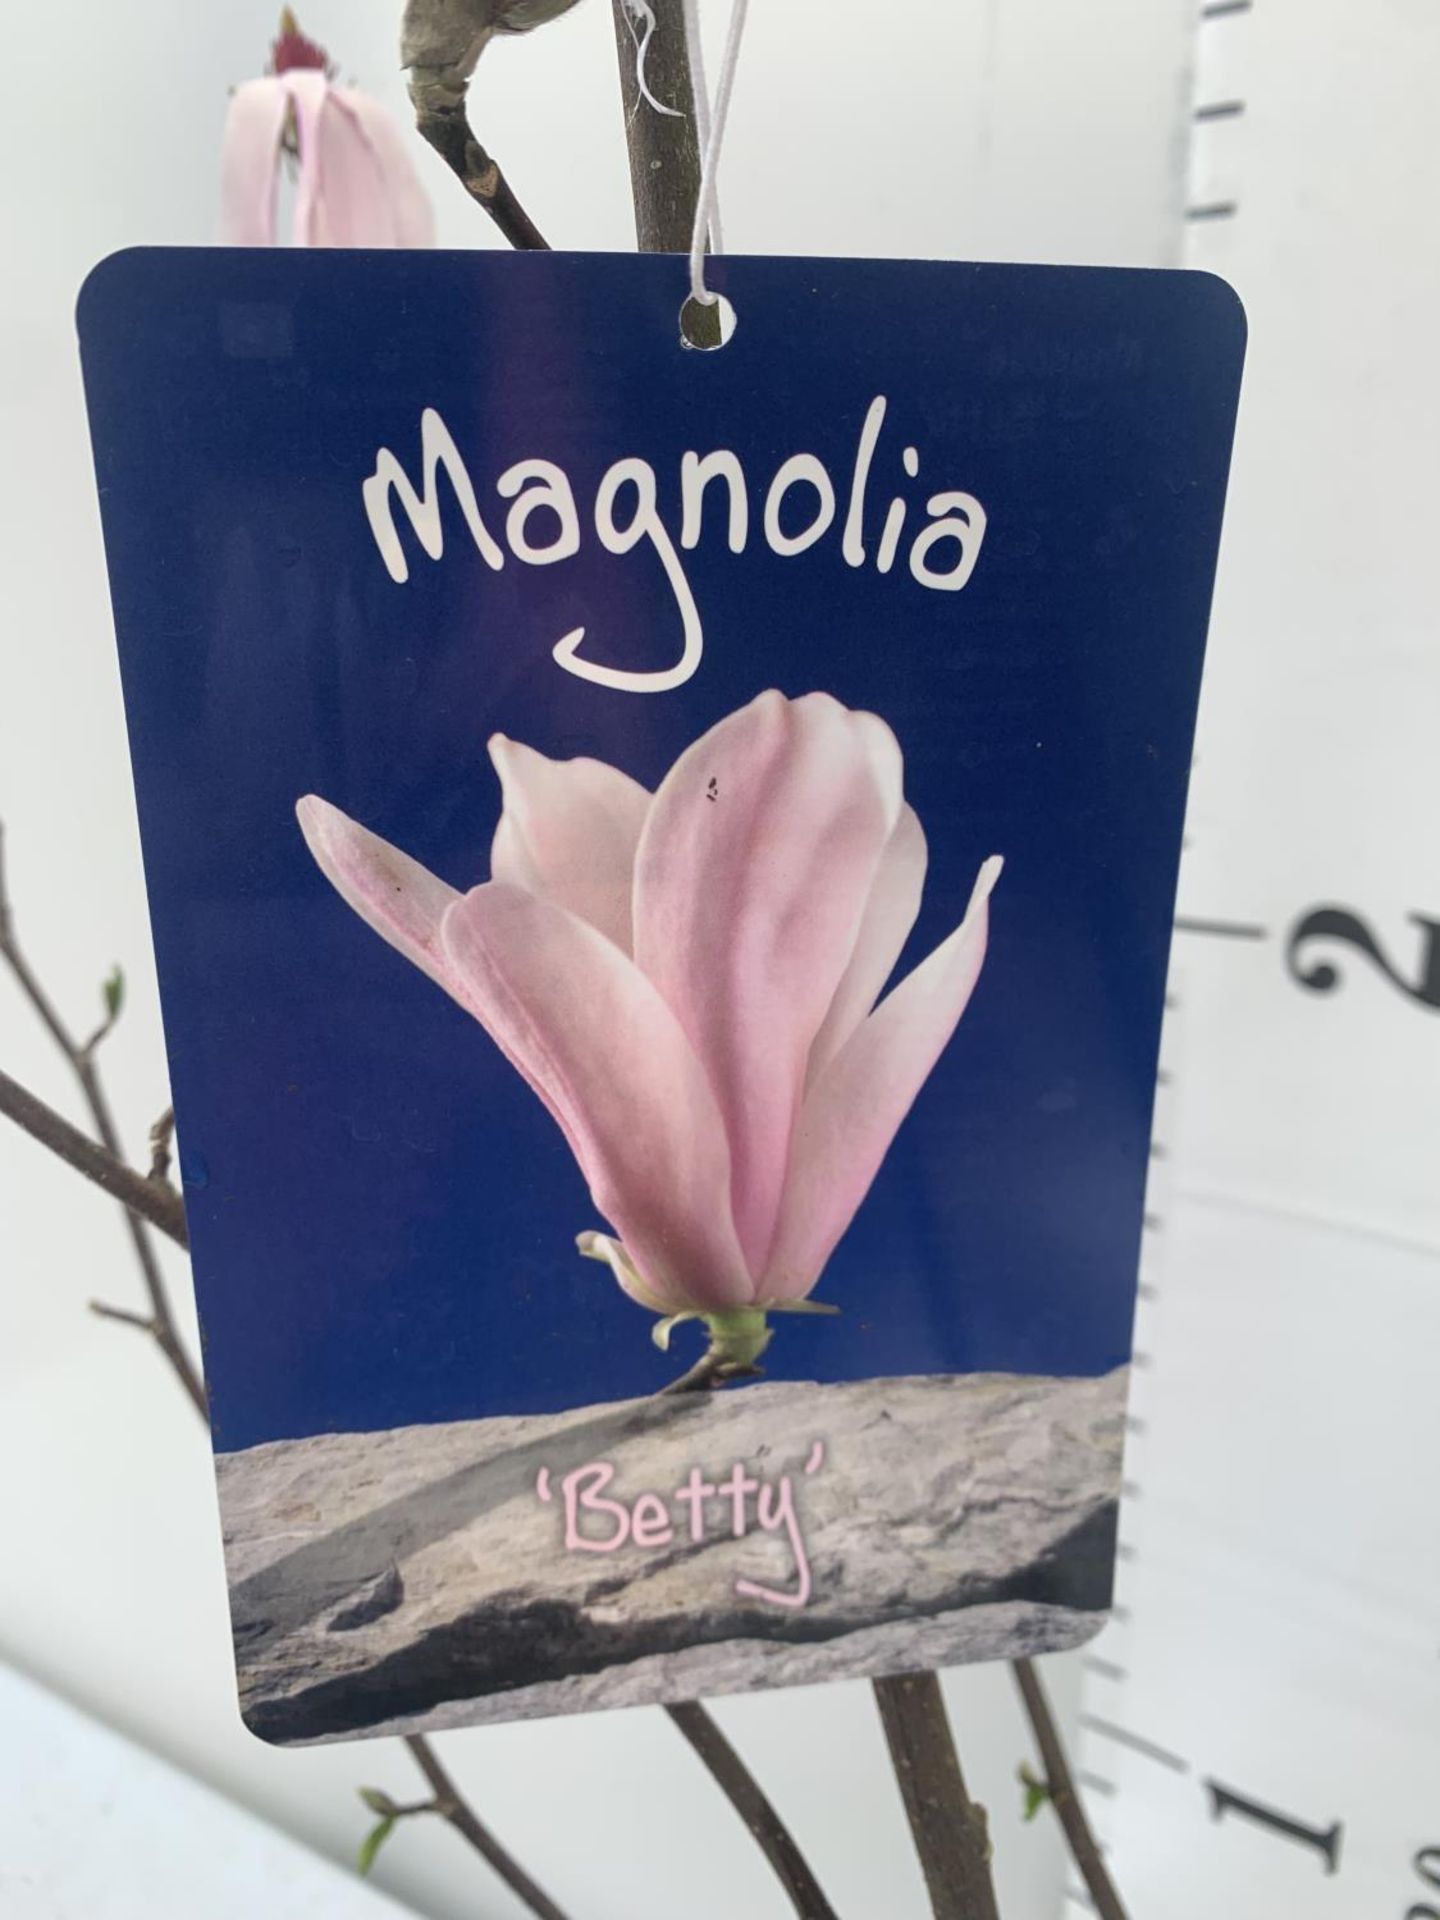 ONE MAGNOLIA 'BETTY' PINK IN A 7 LTR POT APPROX 130CM IN HEIGHT PLUS VAT - Image 5 of 5